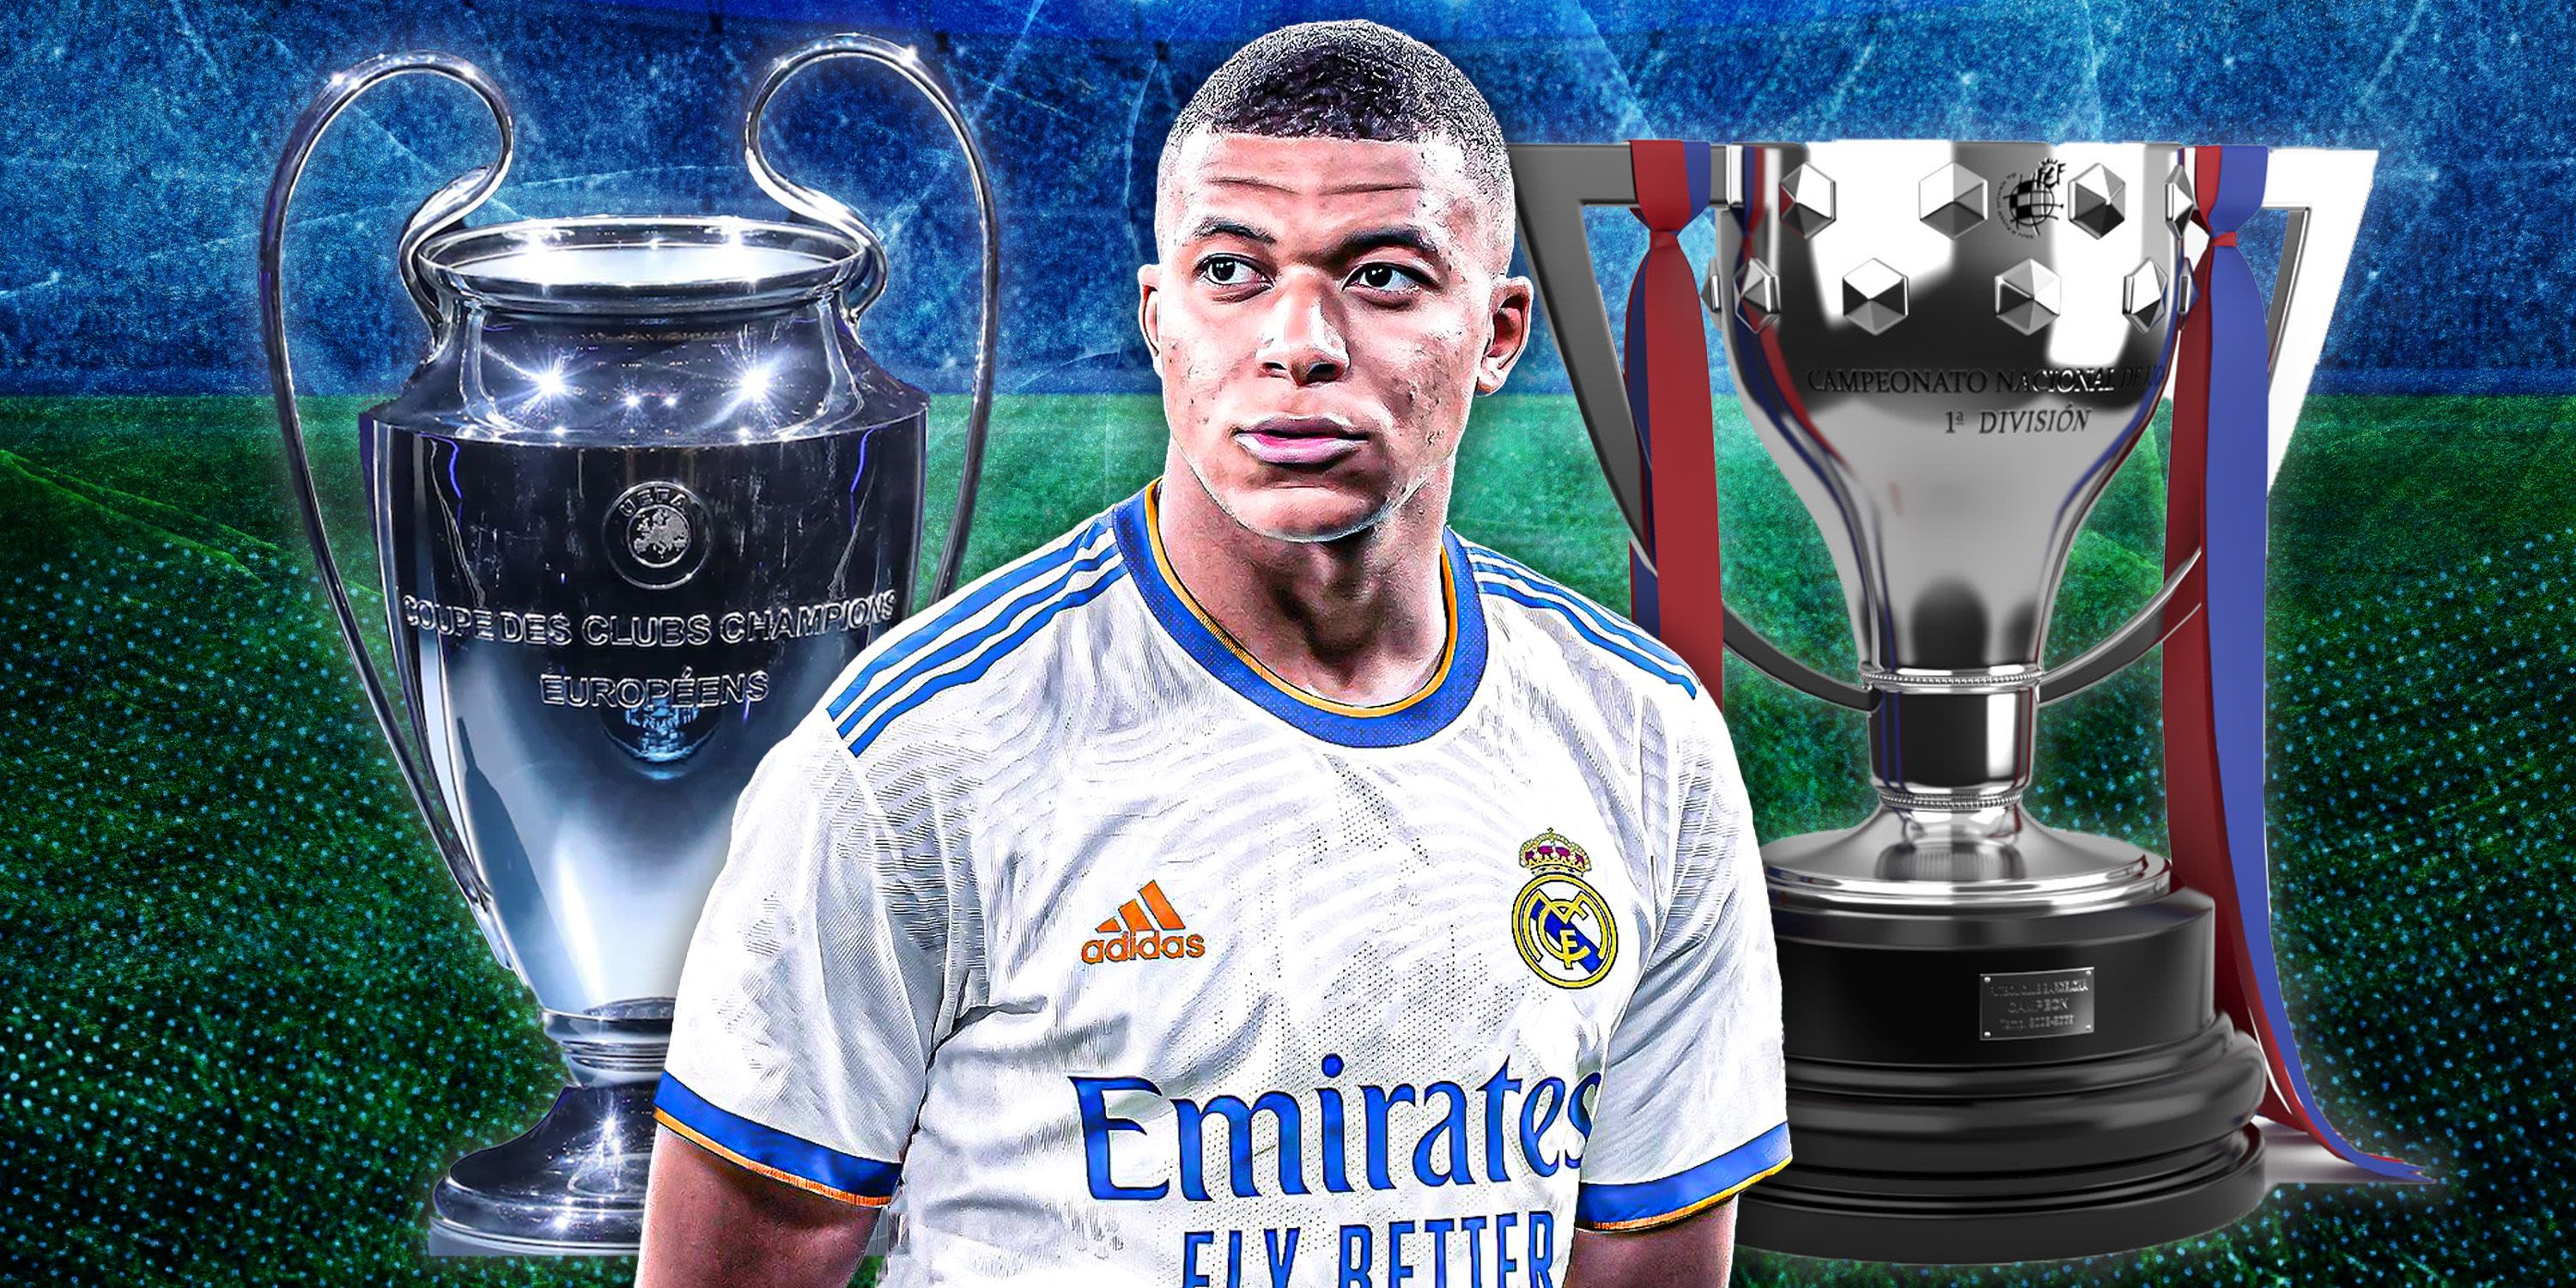 Kylian Mbappe's Real Madrid career has been simulated - the results are incredible